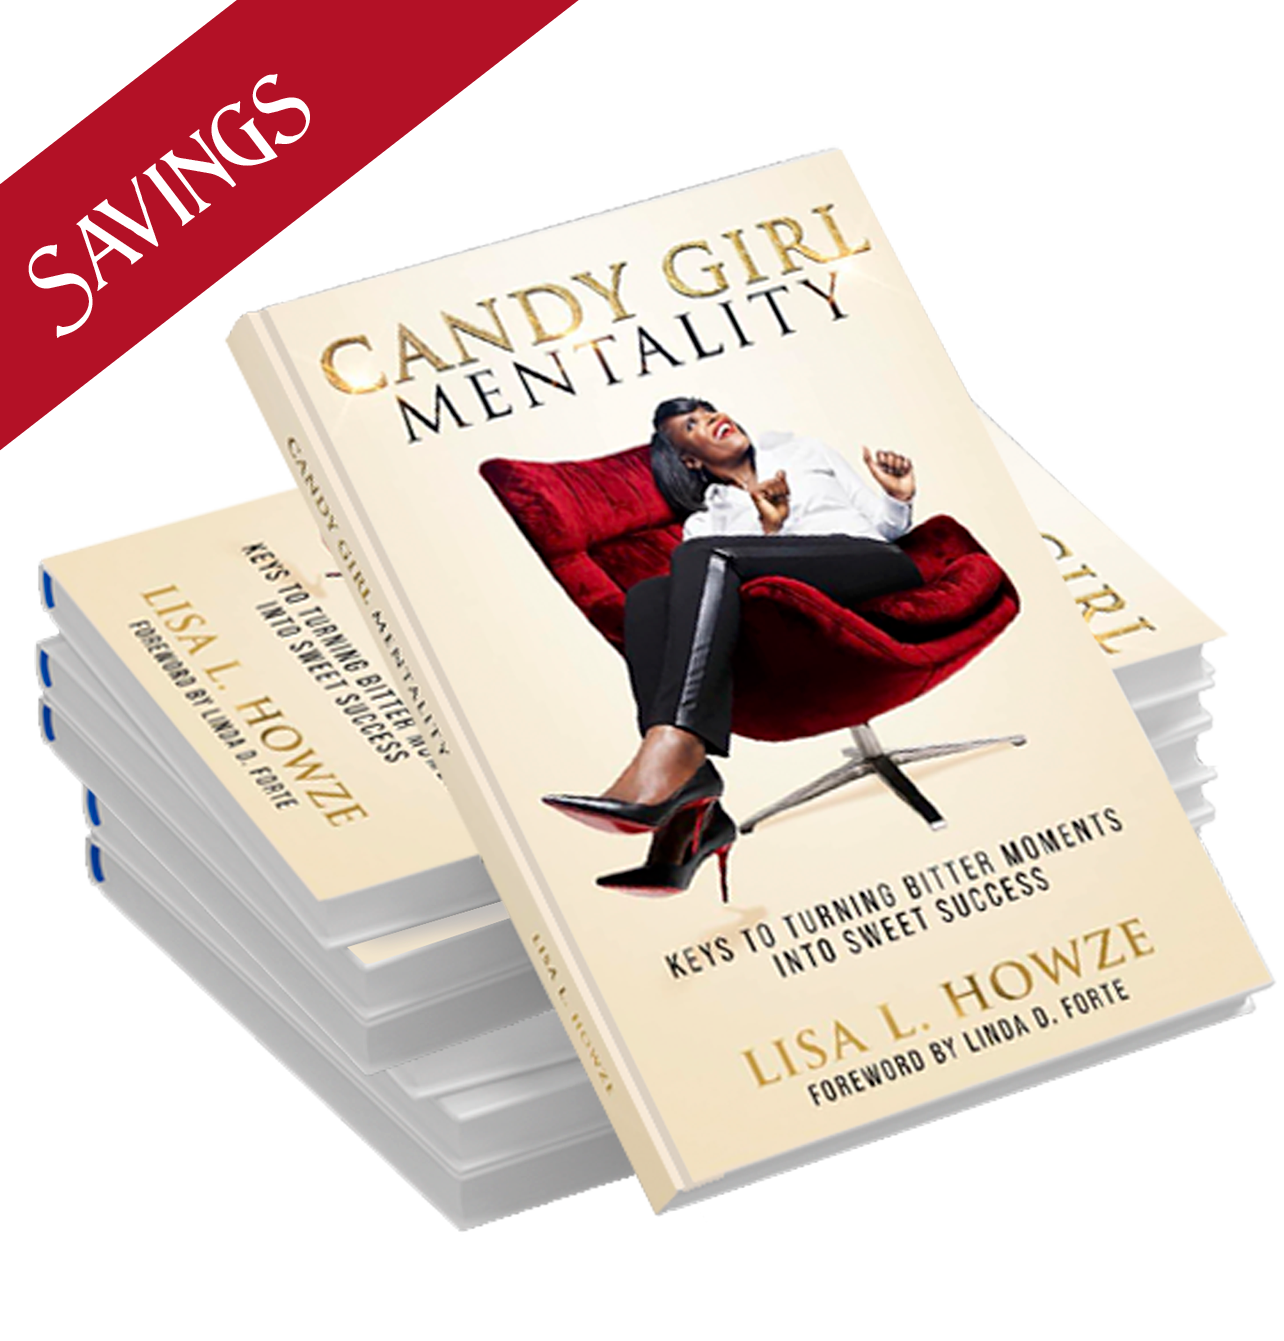 Candy Girl Mentality Book 6 – Bundle (“Friends & Family”)